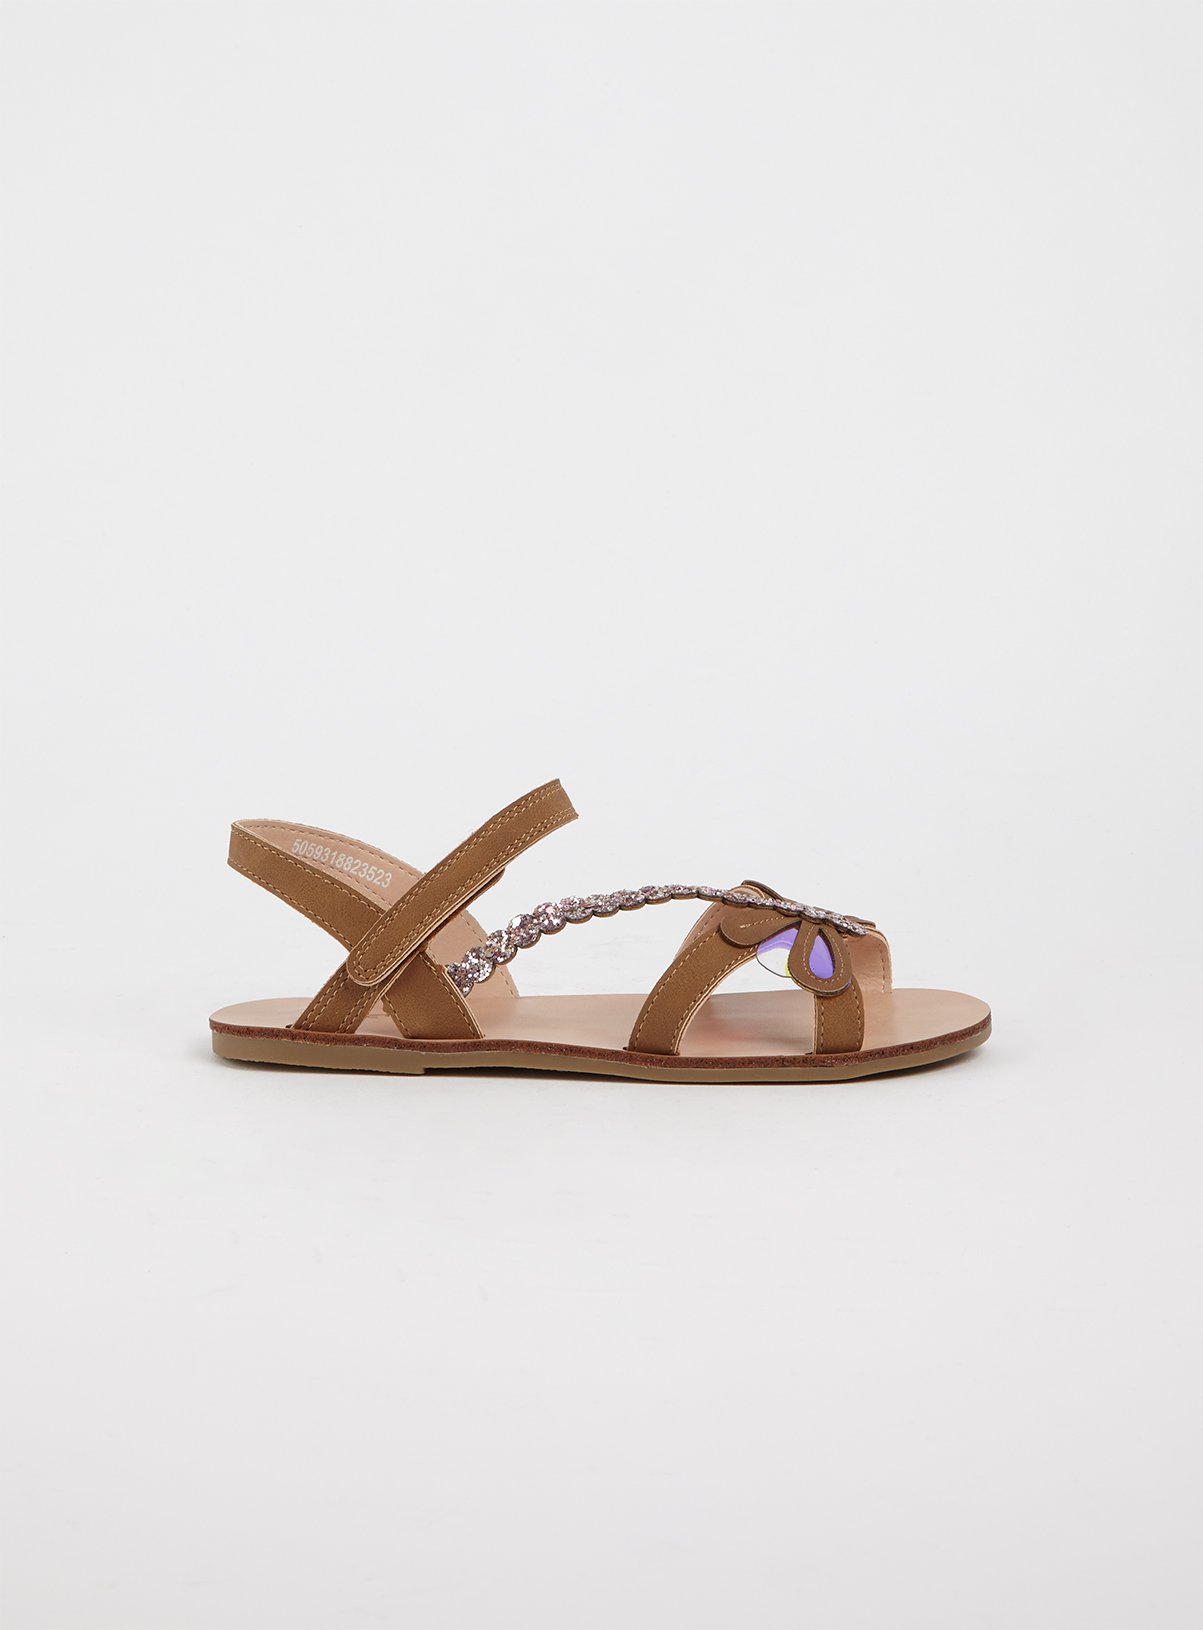 Tan Iridescent Dragonfly Sandals Review